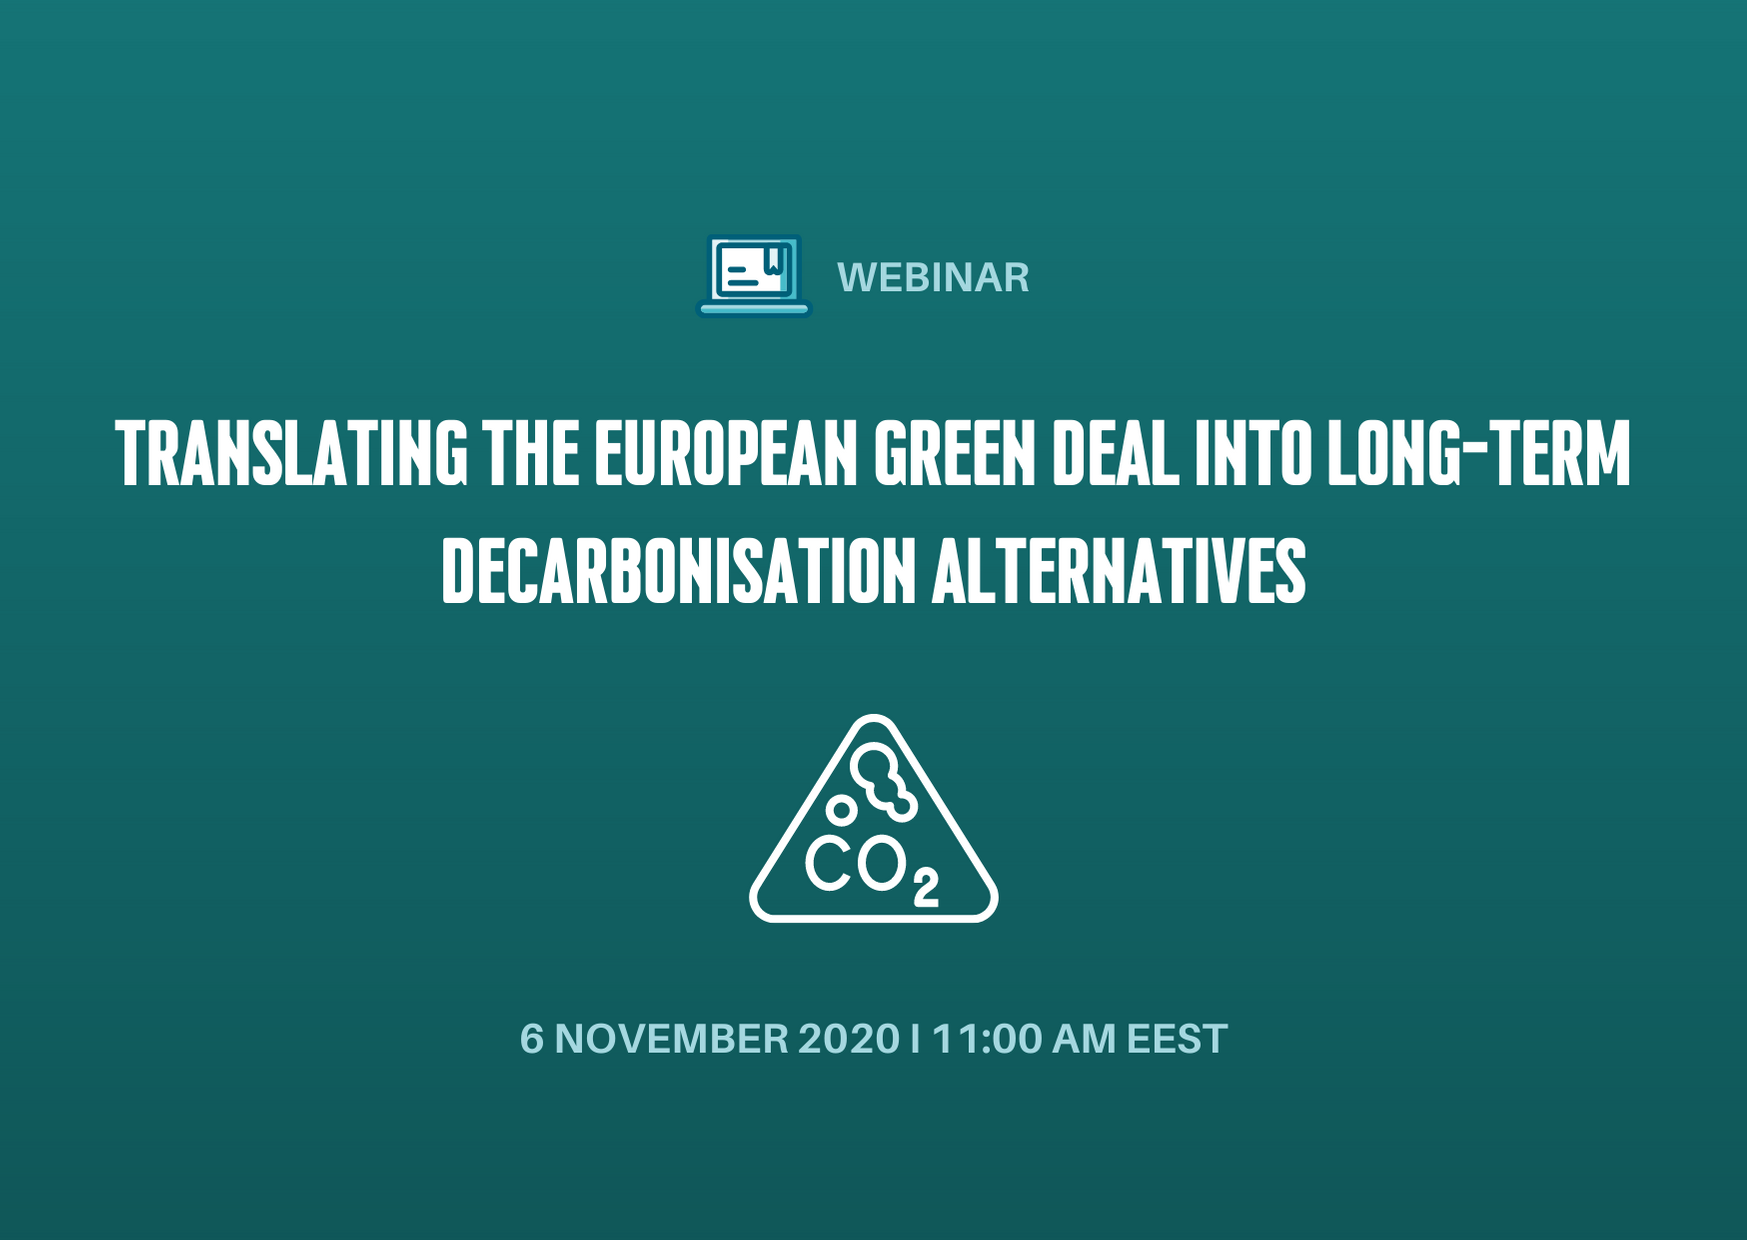 Translating the European Green Deal into long-term decarbonisation alternatives